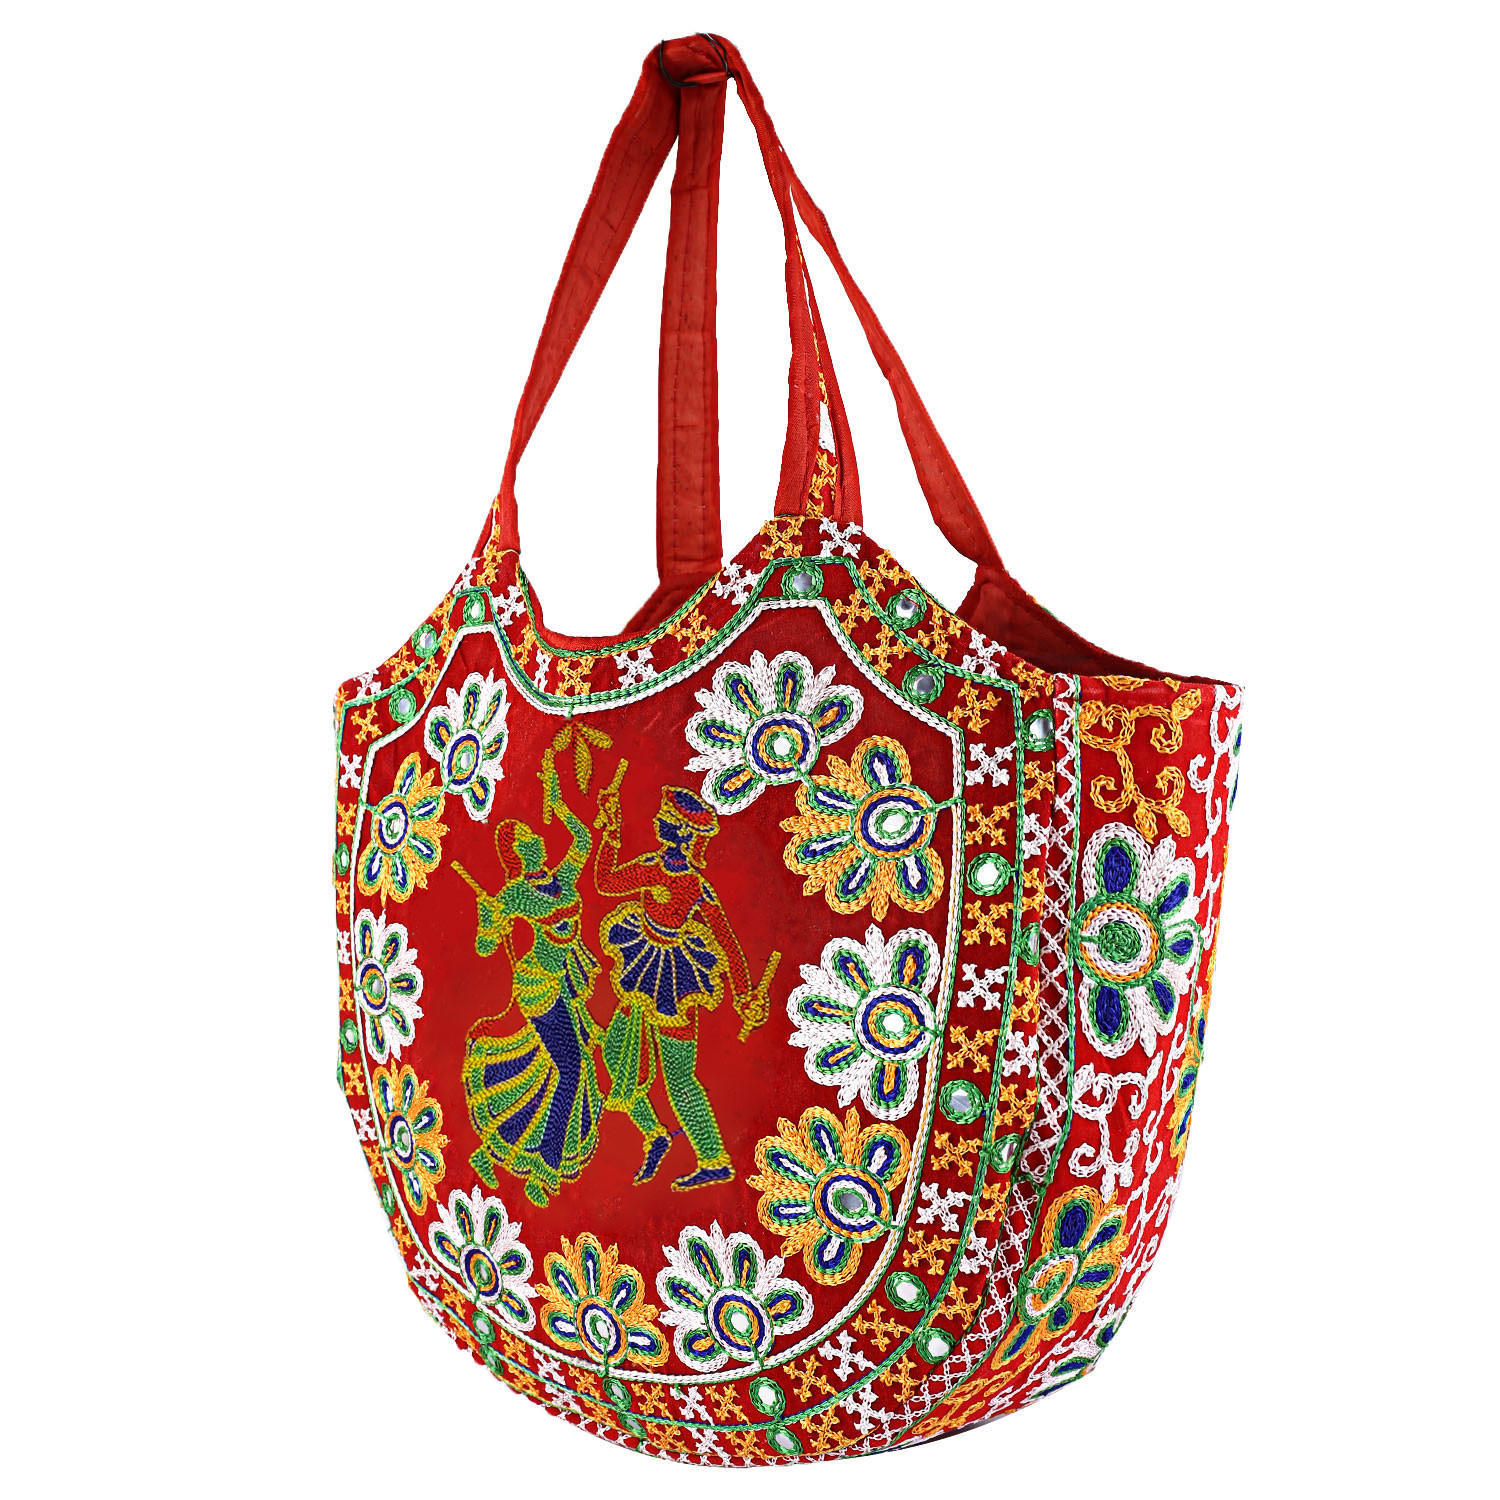 Kuber Industries Multiuses Velvet Rajasthani Embroidery Design Hand Bag/Tote Bag For Daily Trips, Travel, Office (Red)